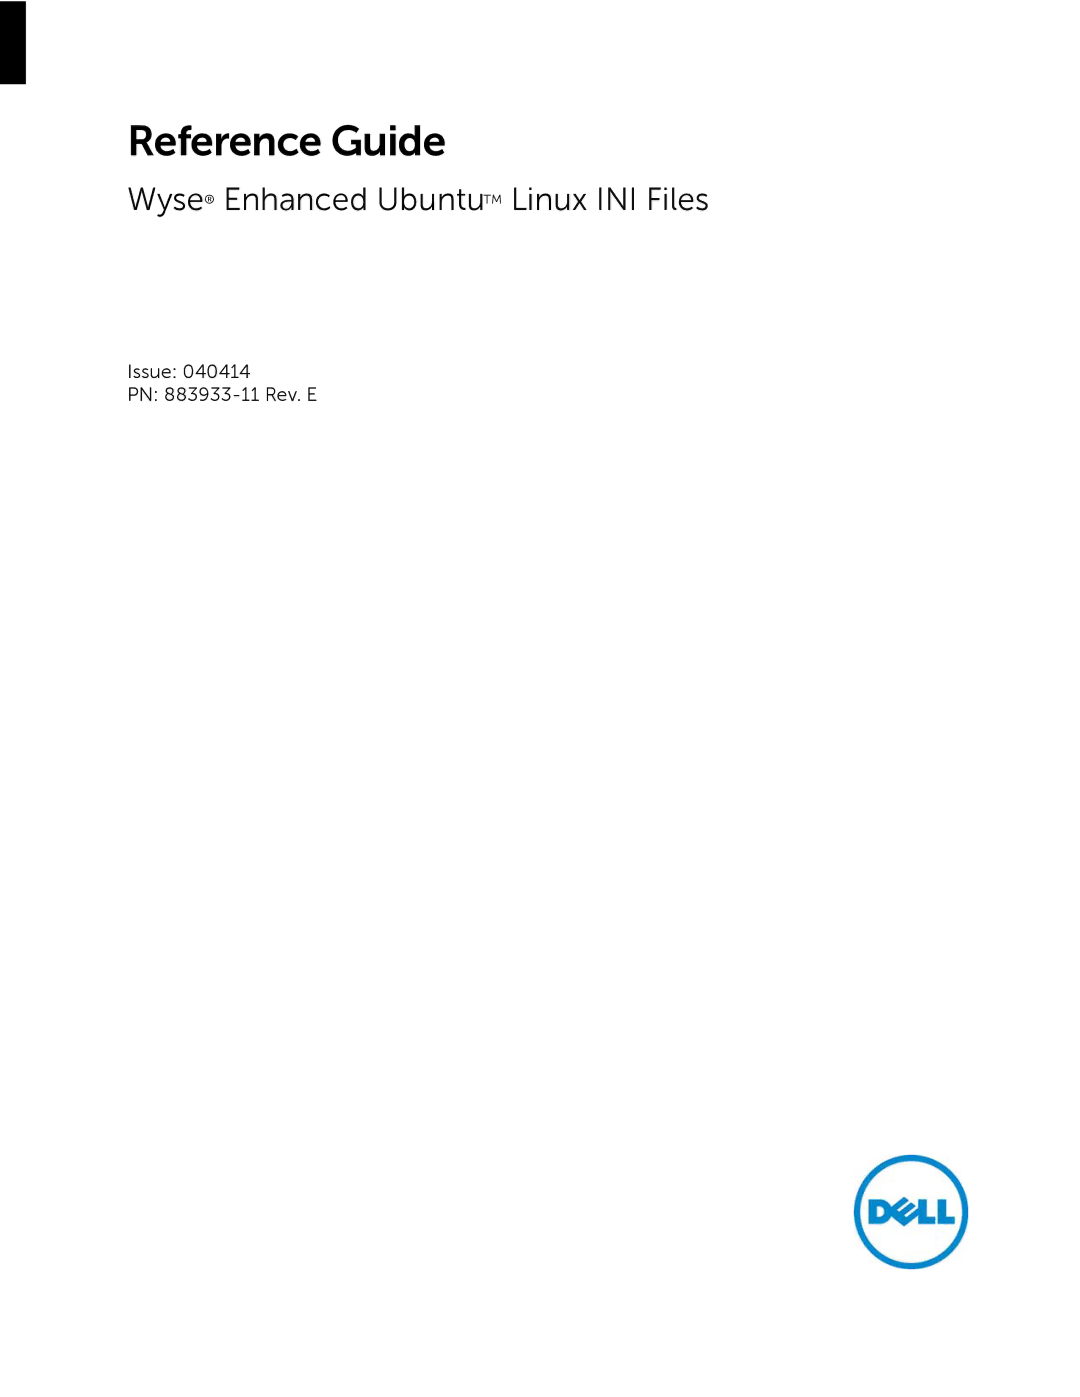 Dell 883933-11 Rev. E manual Reference Guide, Wyse Enhanced UbuntuTM Linux INI Files 